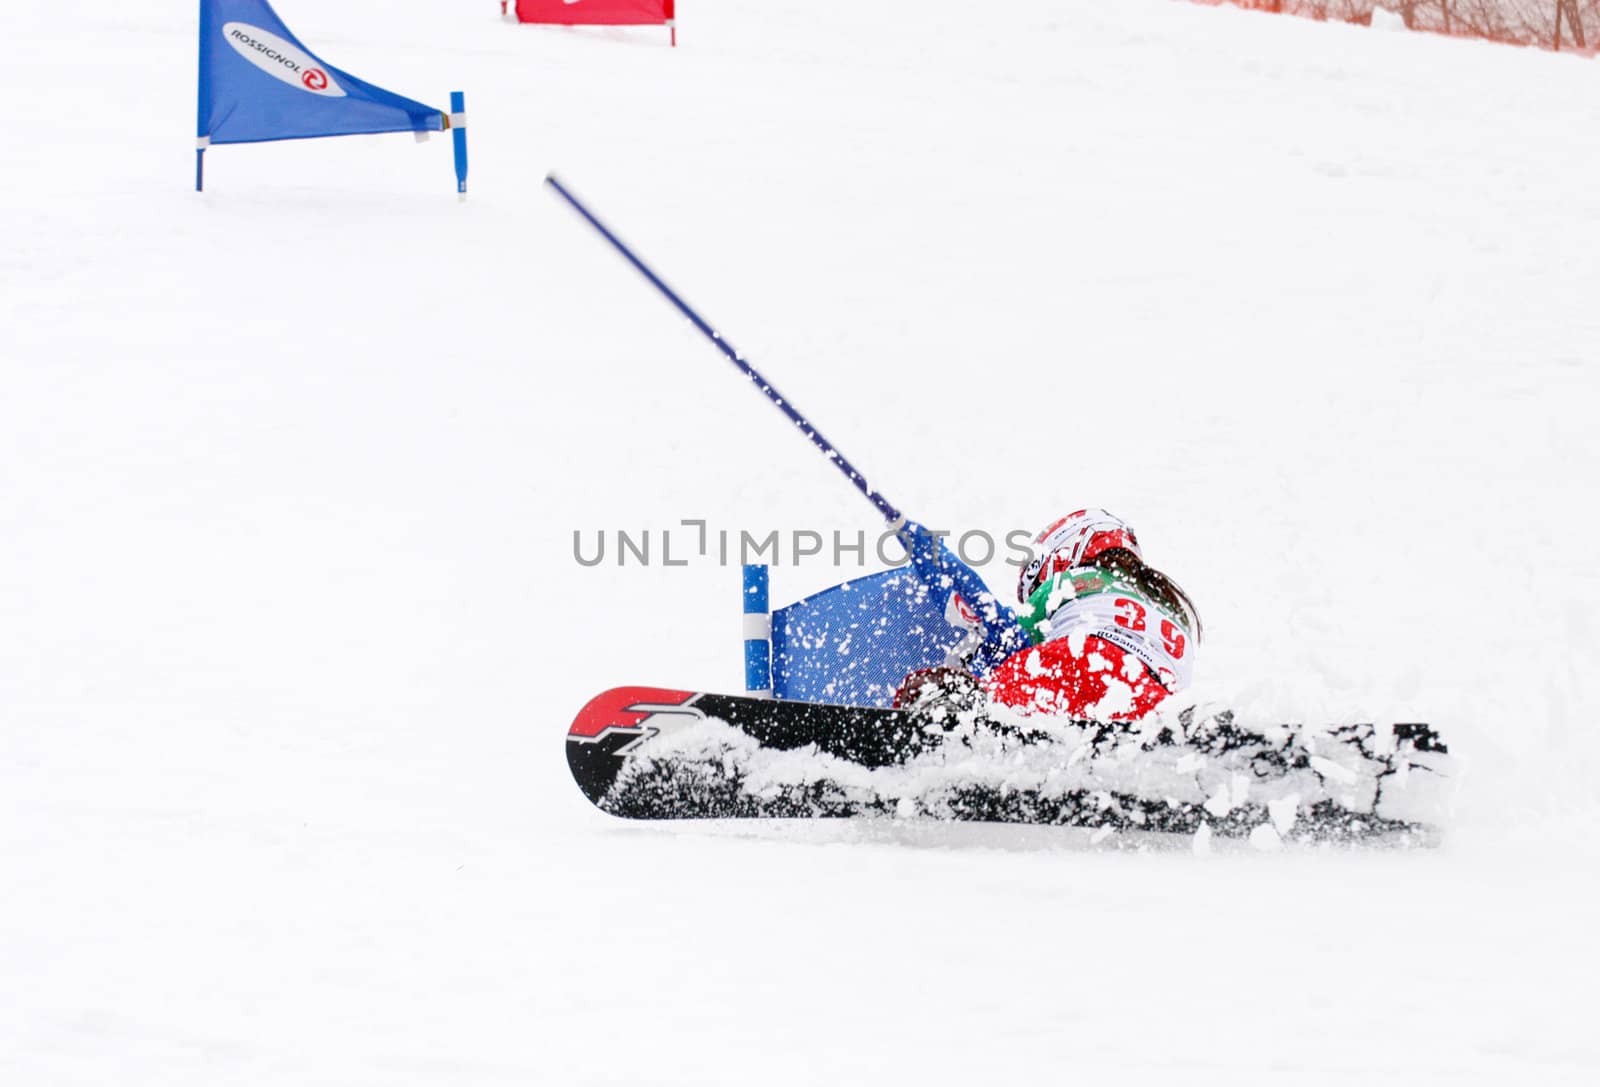  KIEV, UKRAINE - MARCH 4: A participant in action during Snowboard European Cup: full throttle on March 4, 2007 in Kiev, Ukraine